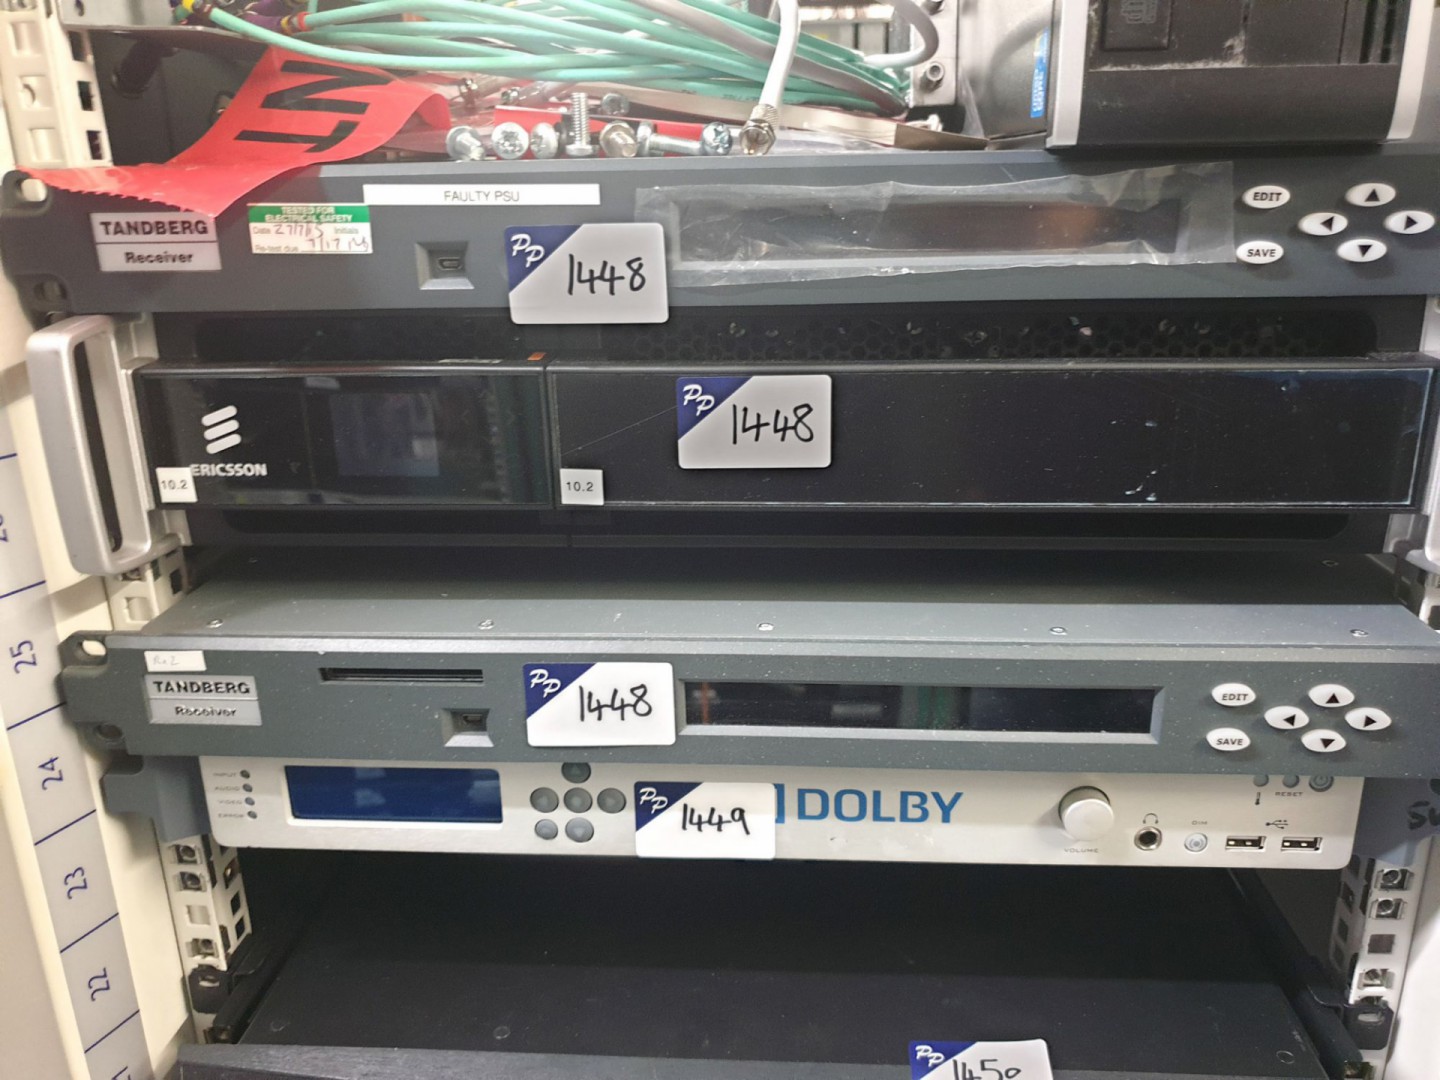 Dolby DP568 professional reference decoder